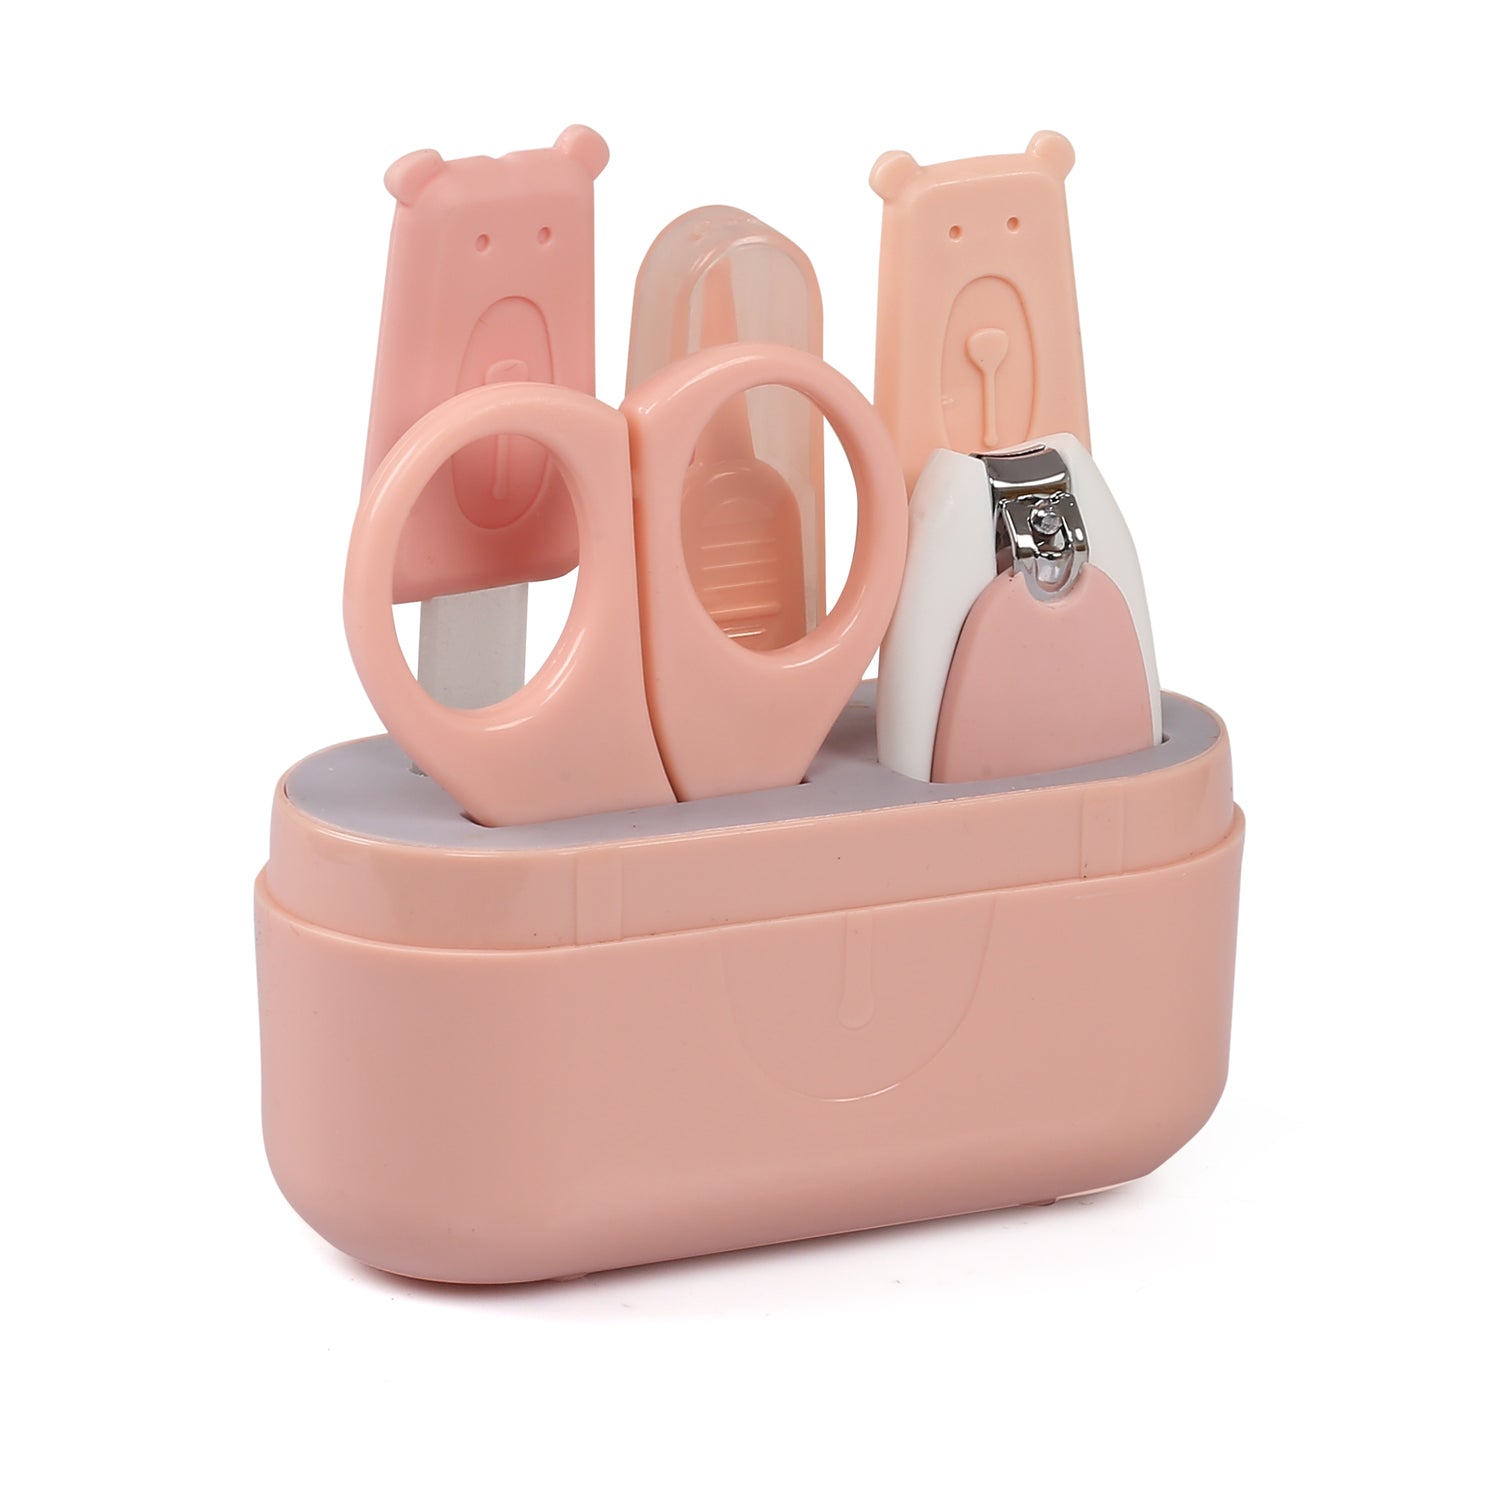 Peach Grooming Kit of 5 Pcs with a Nail Clipper - Baby Moo